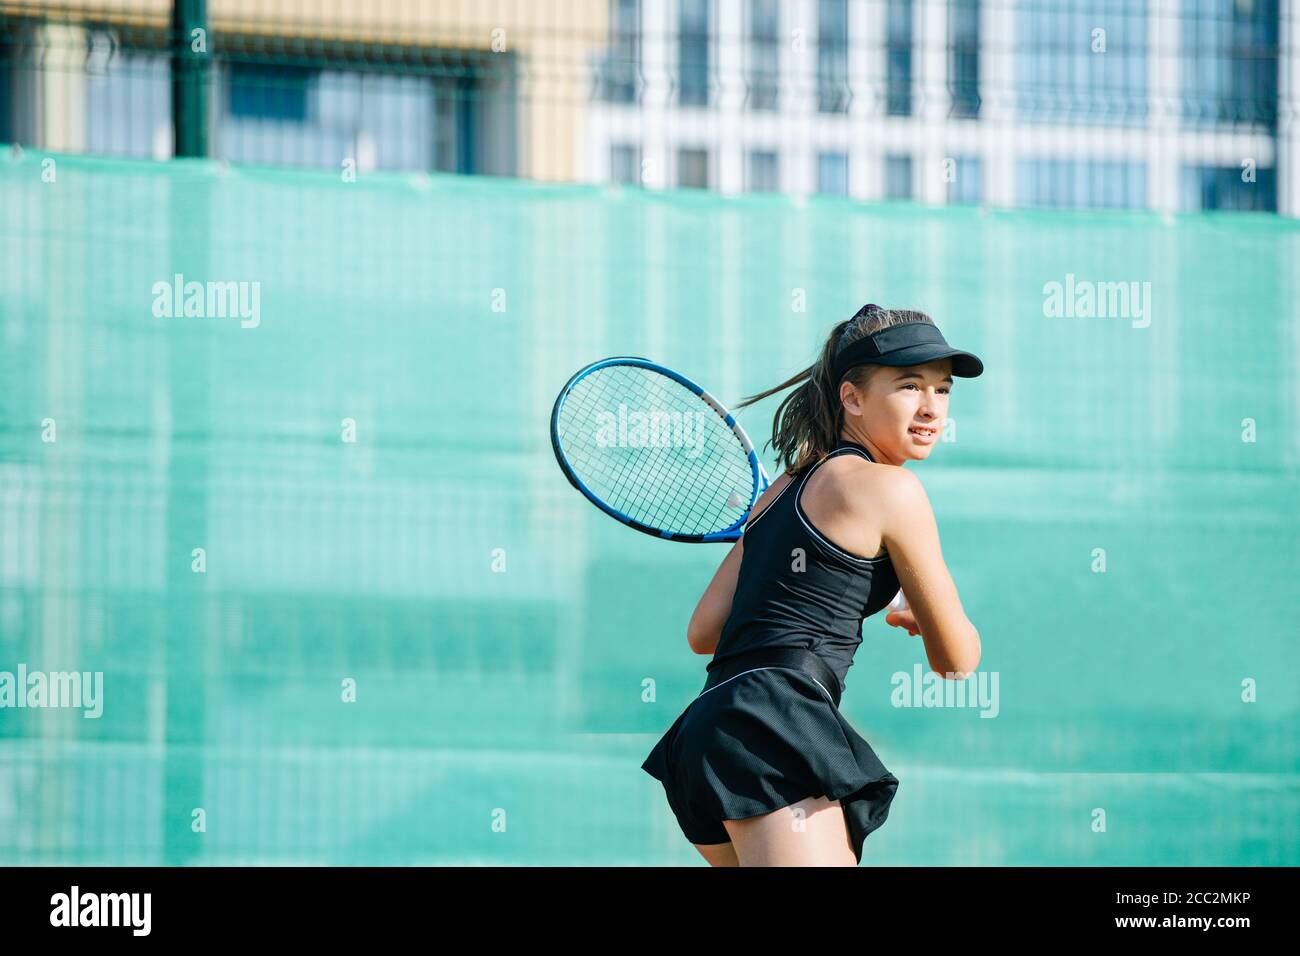 Immersed 16yo girl playing tennis on a new court, ready to return ball Stock Photo